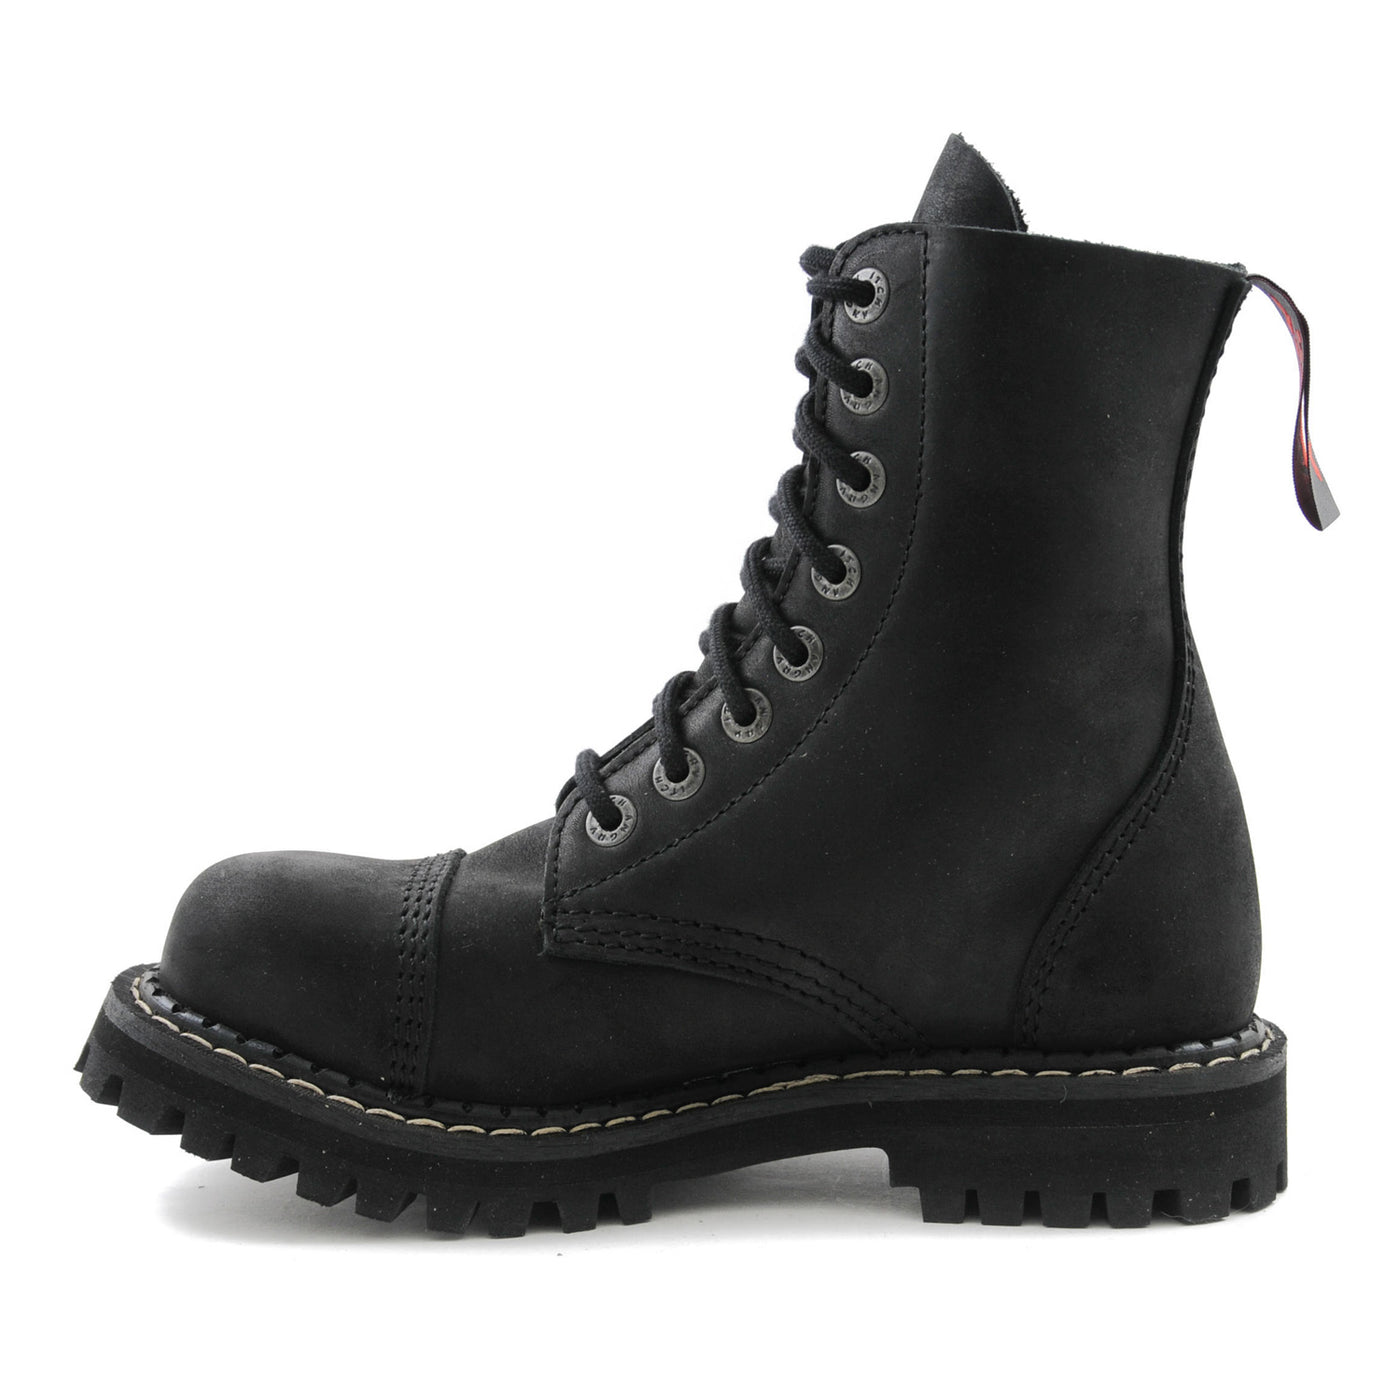 Angry Itch 8 Eyelet Boots with Steel Toe Cap Vintage Black Leather